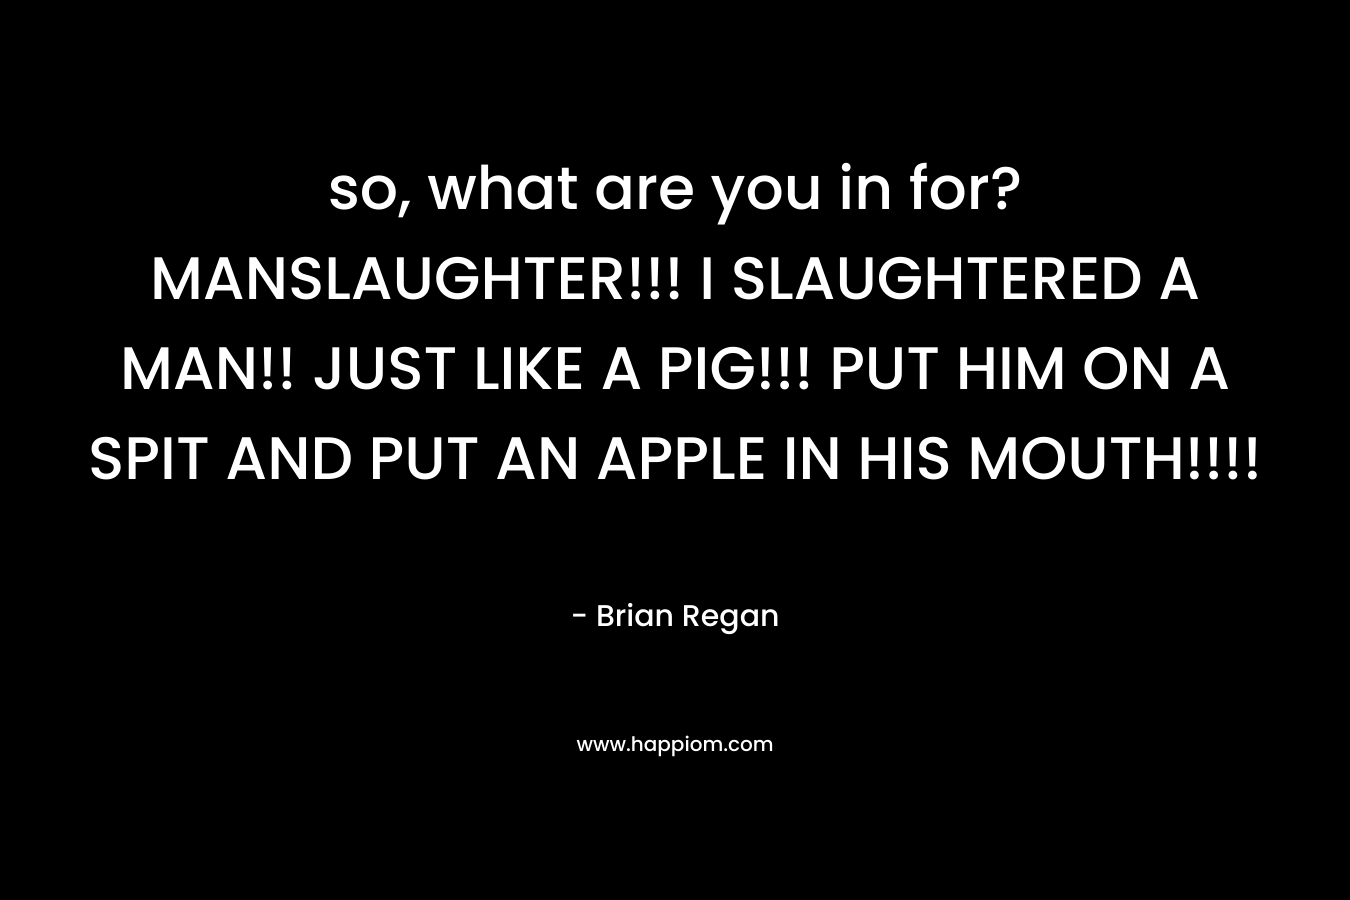 so, what are you in for? MANSLAUGHTER!!! I SLAUGHTERED A MAN!! JUST LIKE A PIG!!! PUT HIM ON A SPIT AND PUT AN APPLE IN HIS MOUTH!!!! – Brian Regan